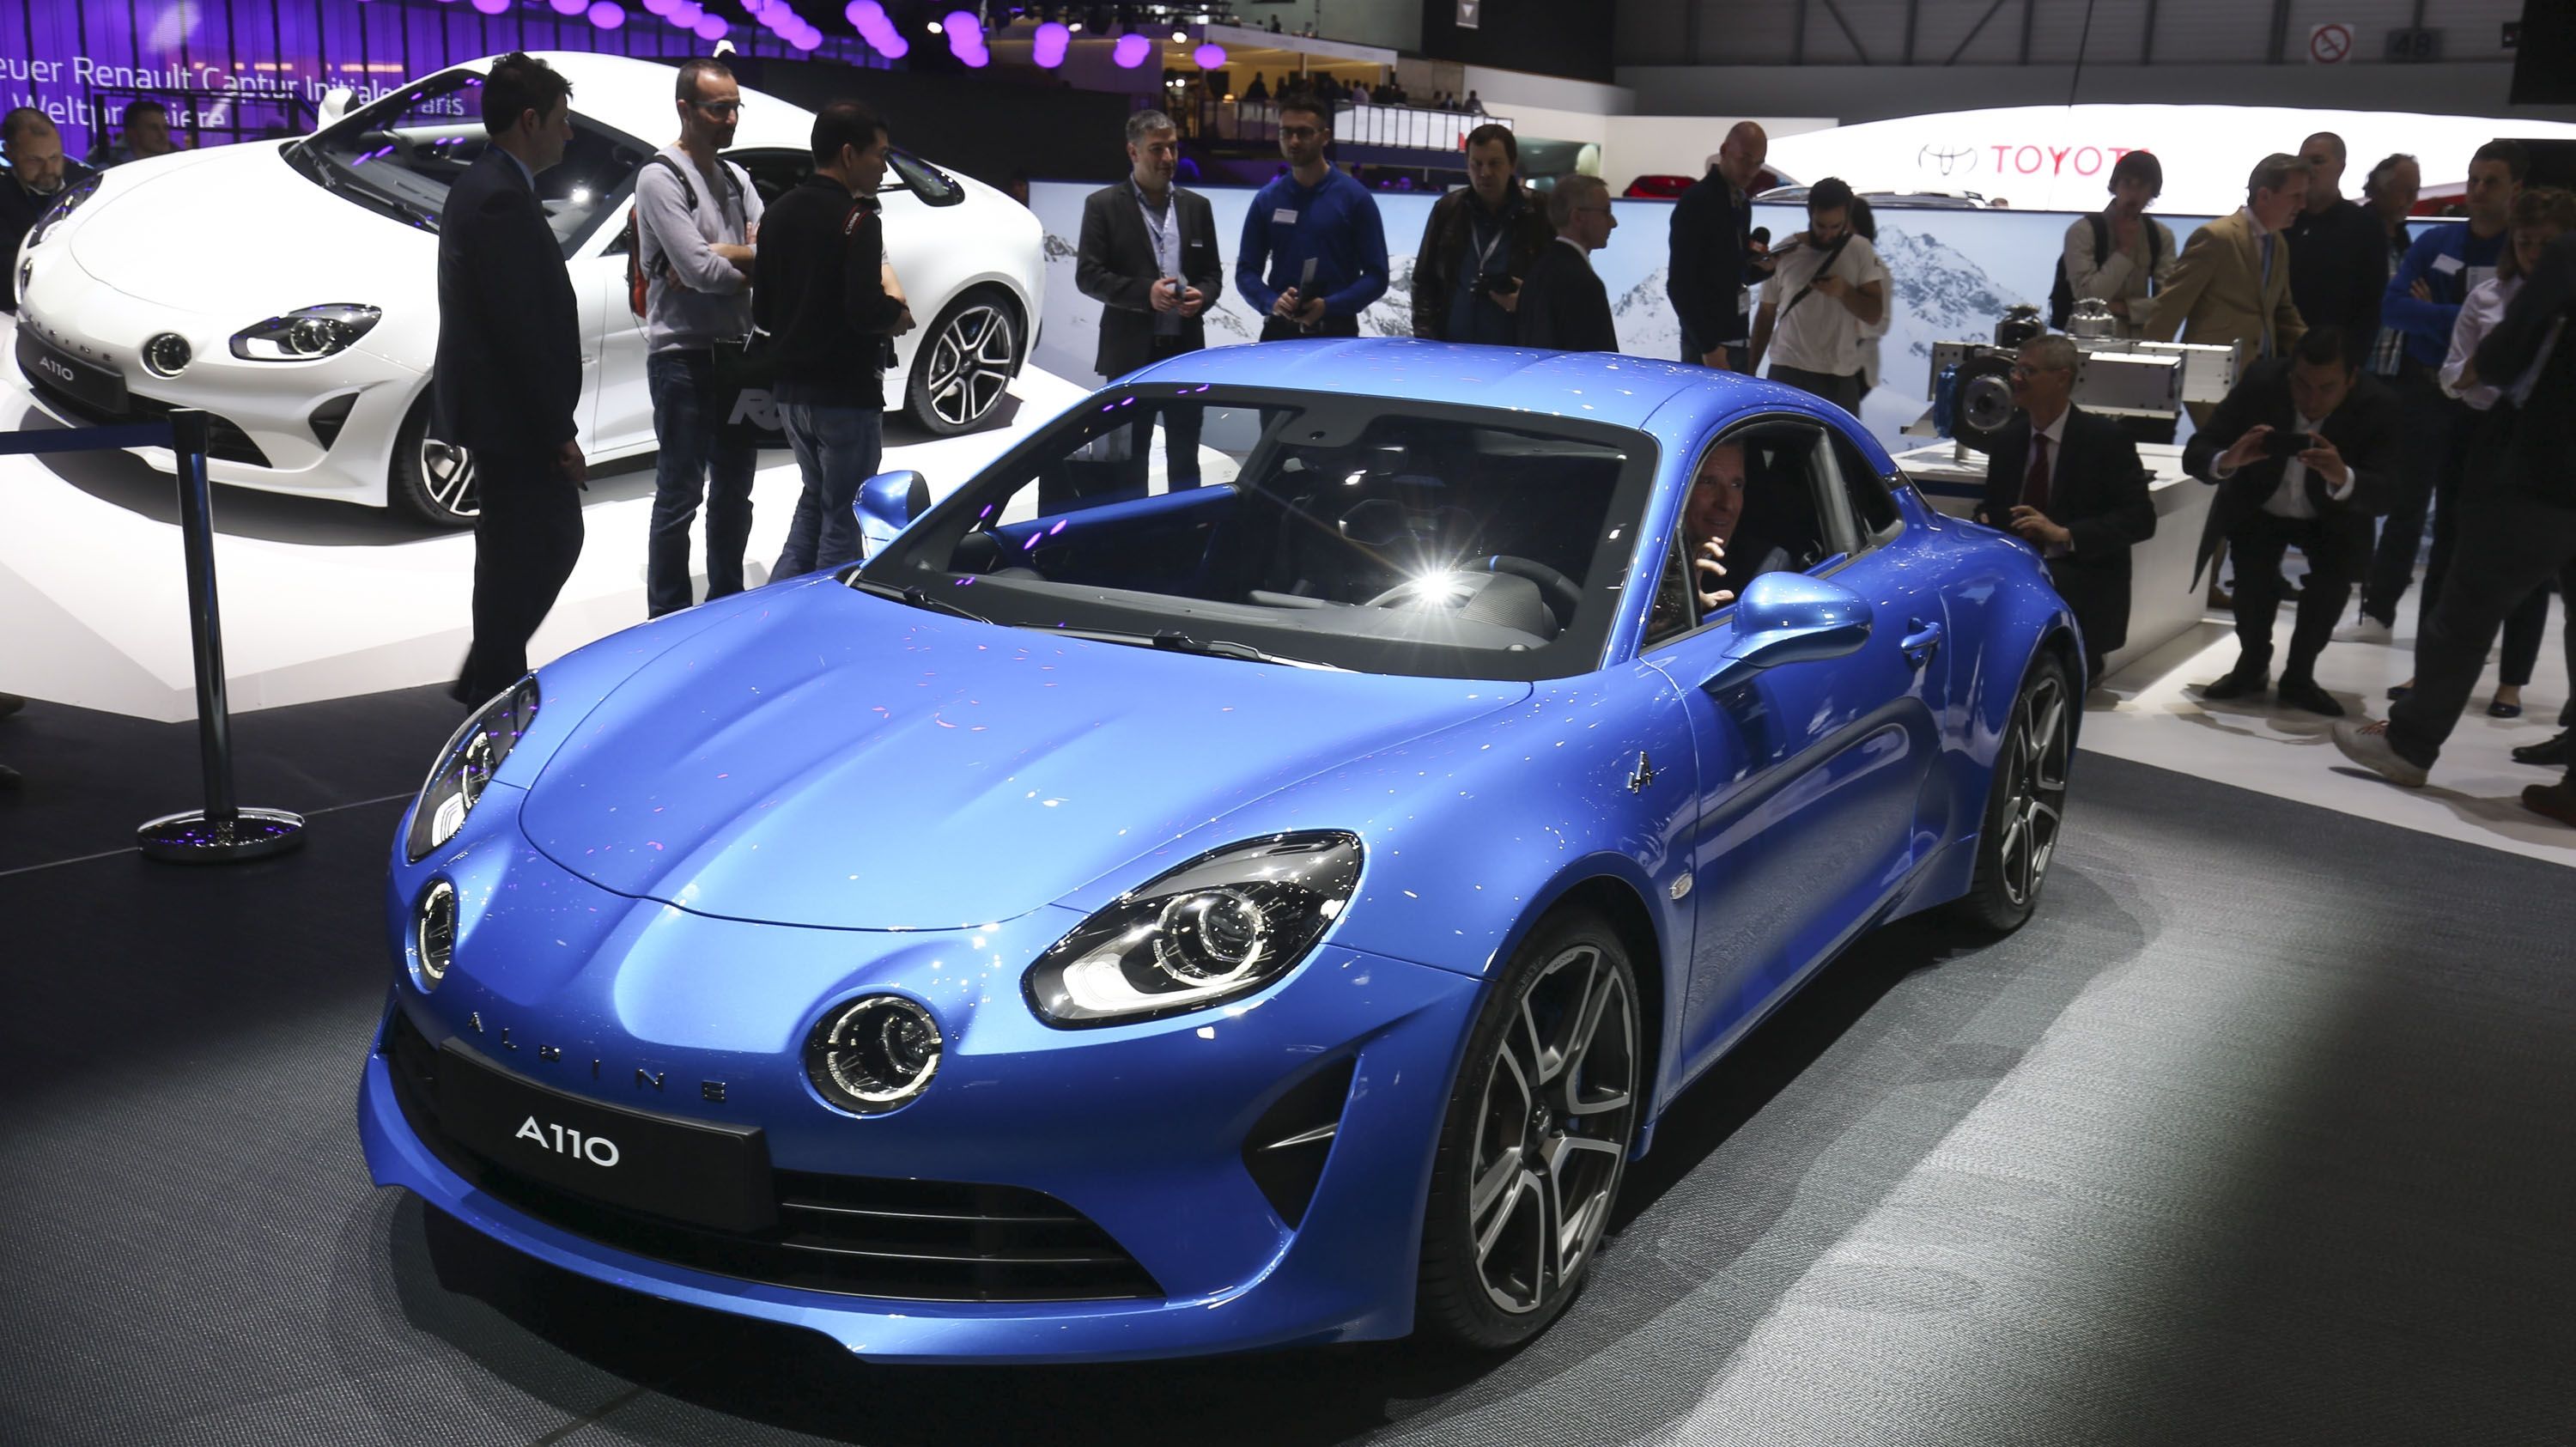 The New Alpine A110 Is A Nice Tribute To The Past